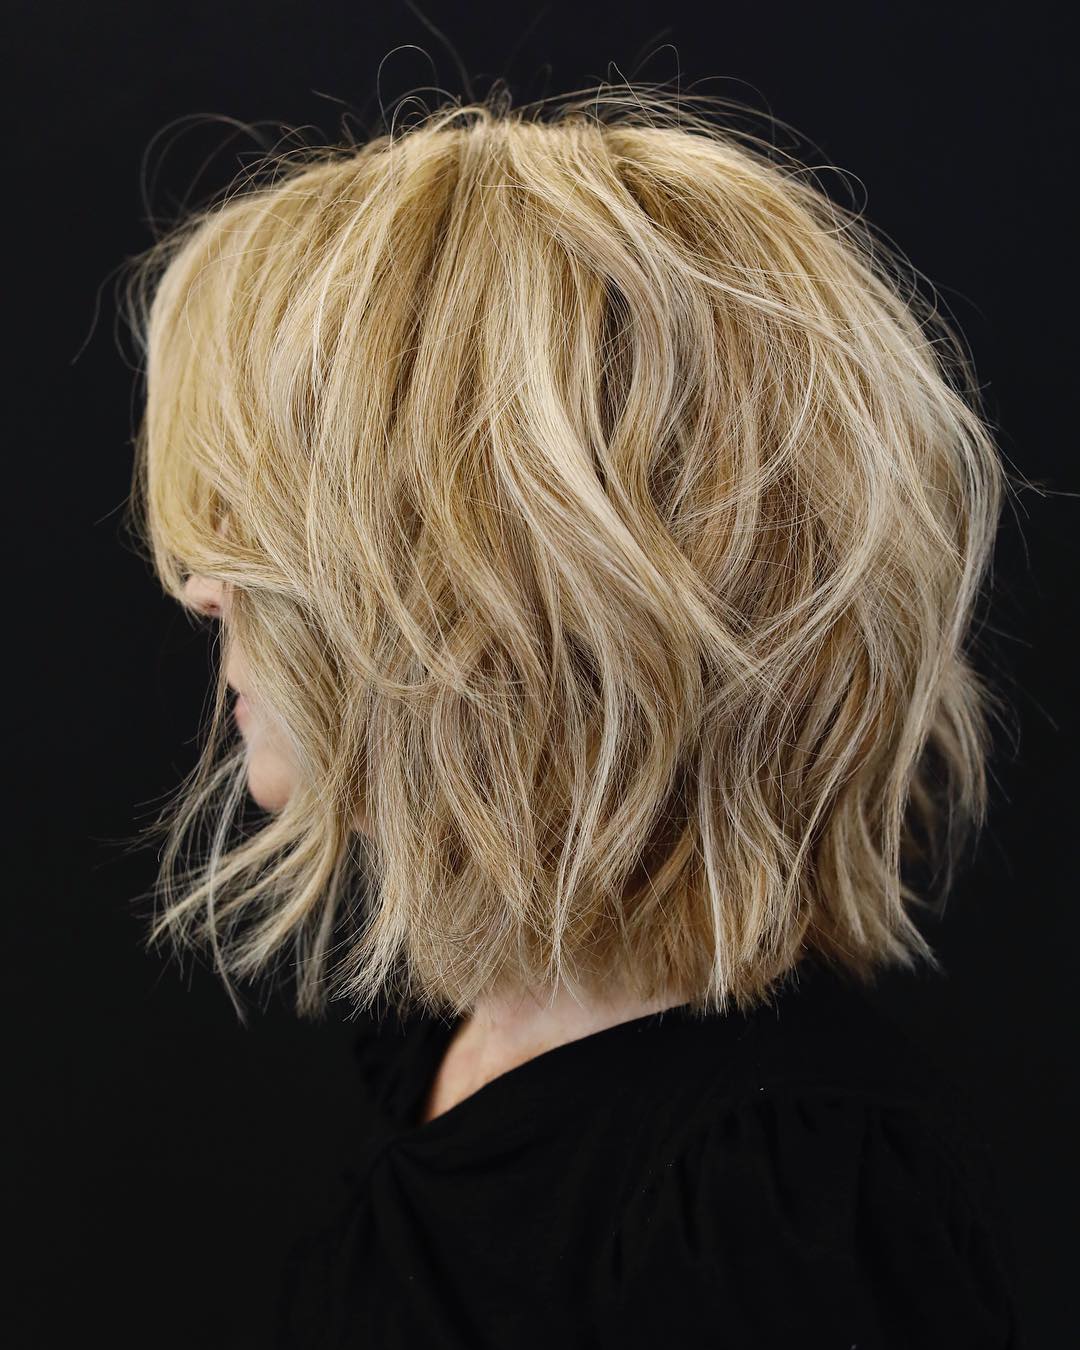 Best Short Bob Haircuts for Thick Hair, Women Short Hairstyles